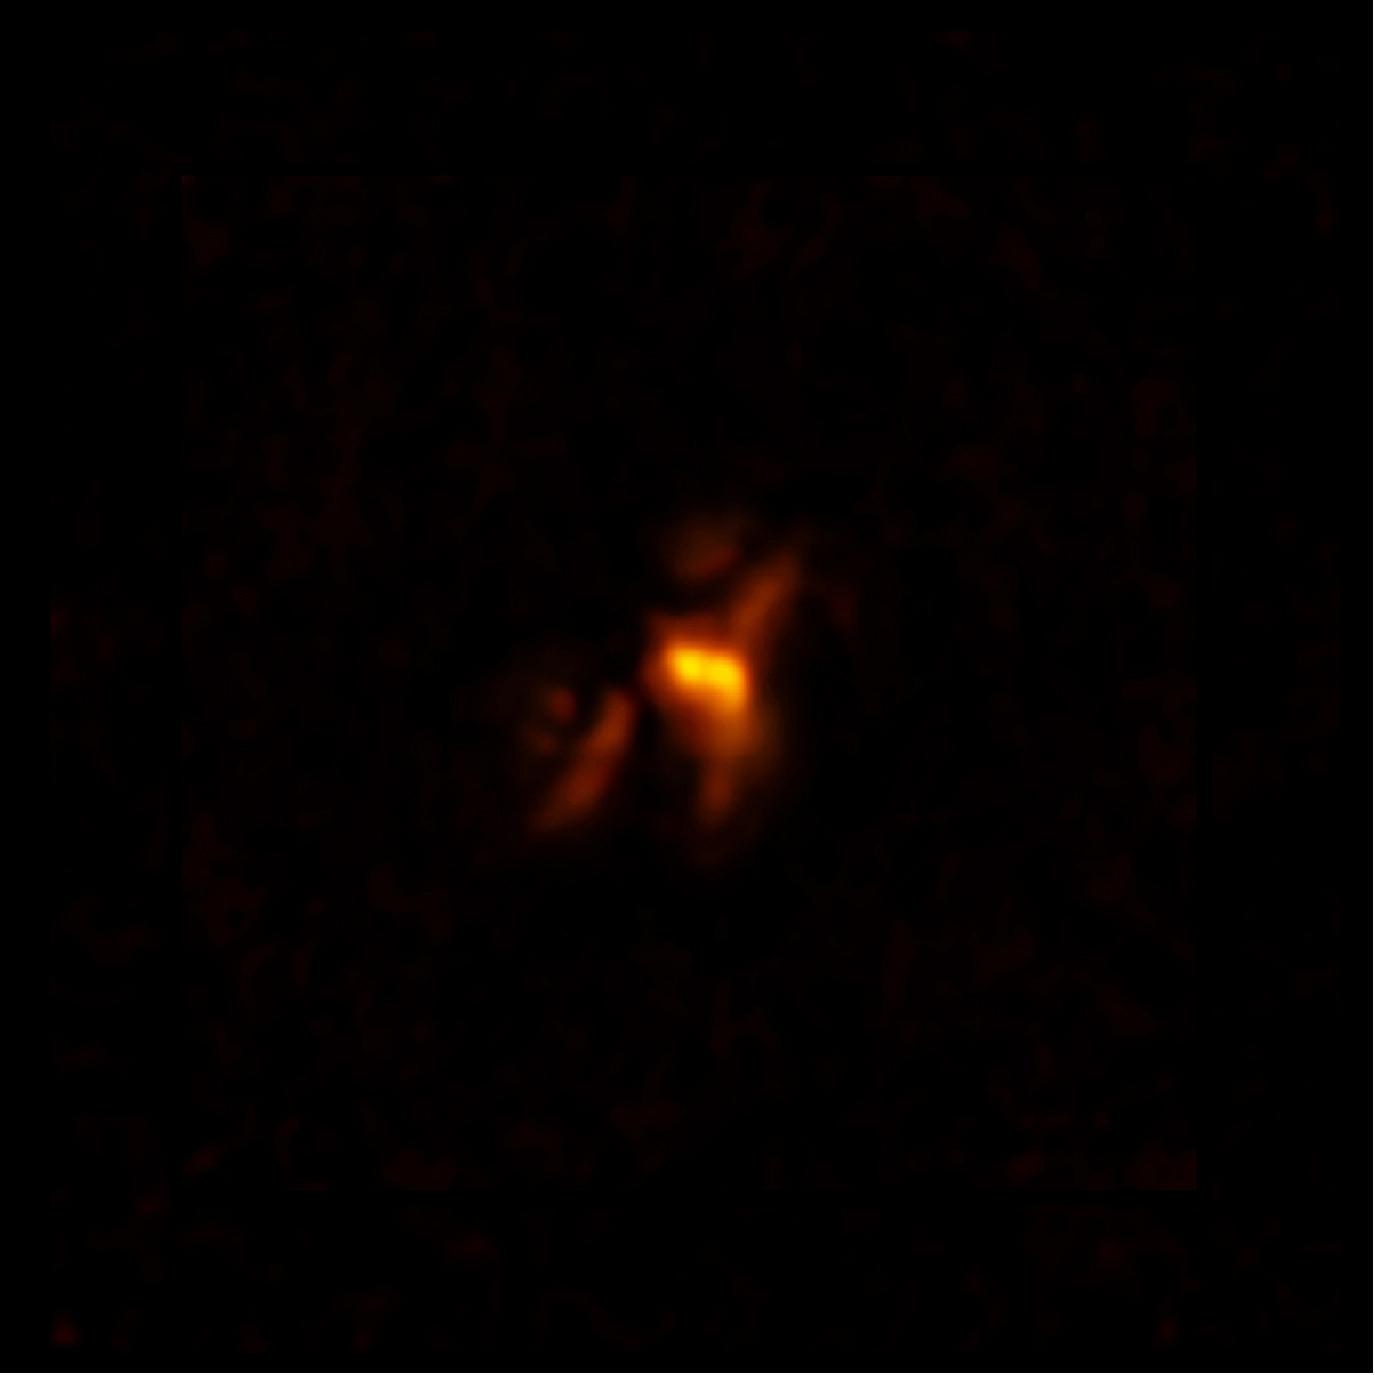 Figure 39: ALMA image of cold molecular gas at the heart of the Phoenix Cluster. The filaments extending from the center hug enormous radio bubbles created by jets from a supermassive black hole. This discovery sheds light on the complex relationship between a supermassive black hole and its host galaxy [image credit: ALMA (ESO/NAOJ/NRAO), H. Russell et al.; B. Saxton (NRAO/AUI/NSF)]